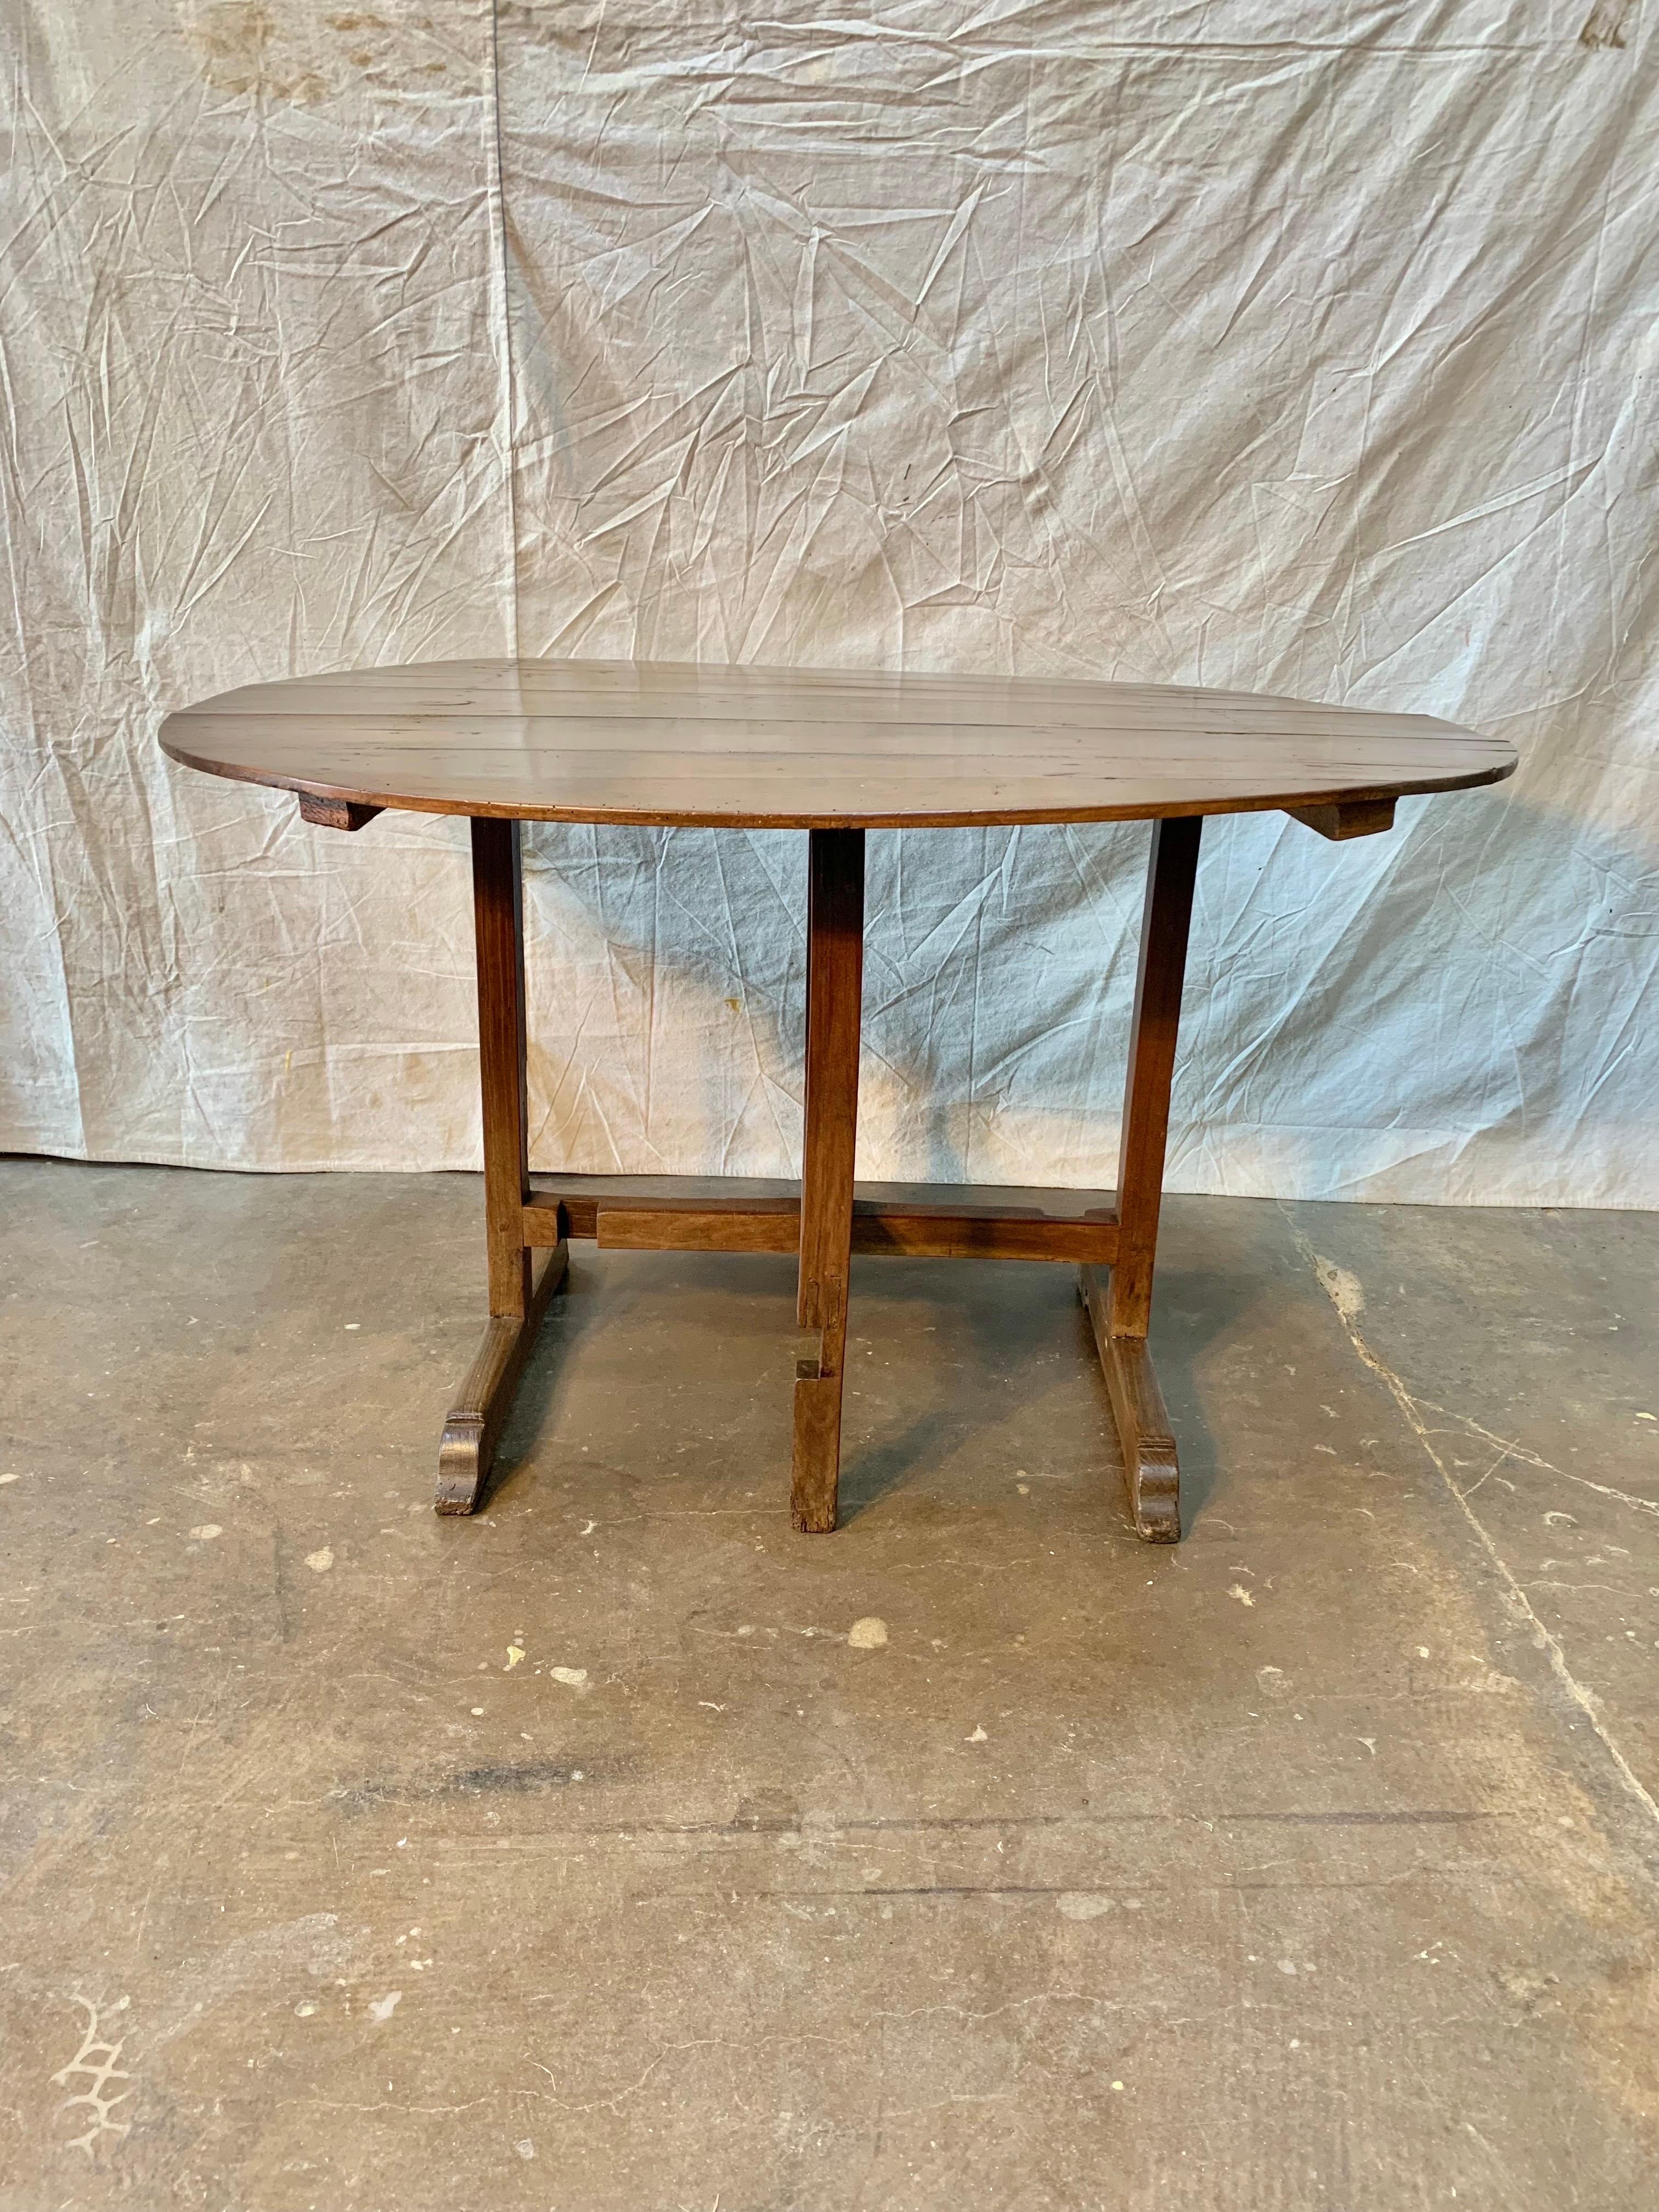 French wine tasting table, also known as a vendage or vigeron table, which was once used in the vineyards of France for tasting wine or enjoying a meal. This table would be suitable for use as a side table or in a wine cellar. Featuring a tilt-top,